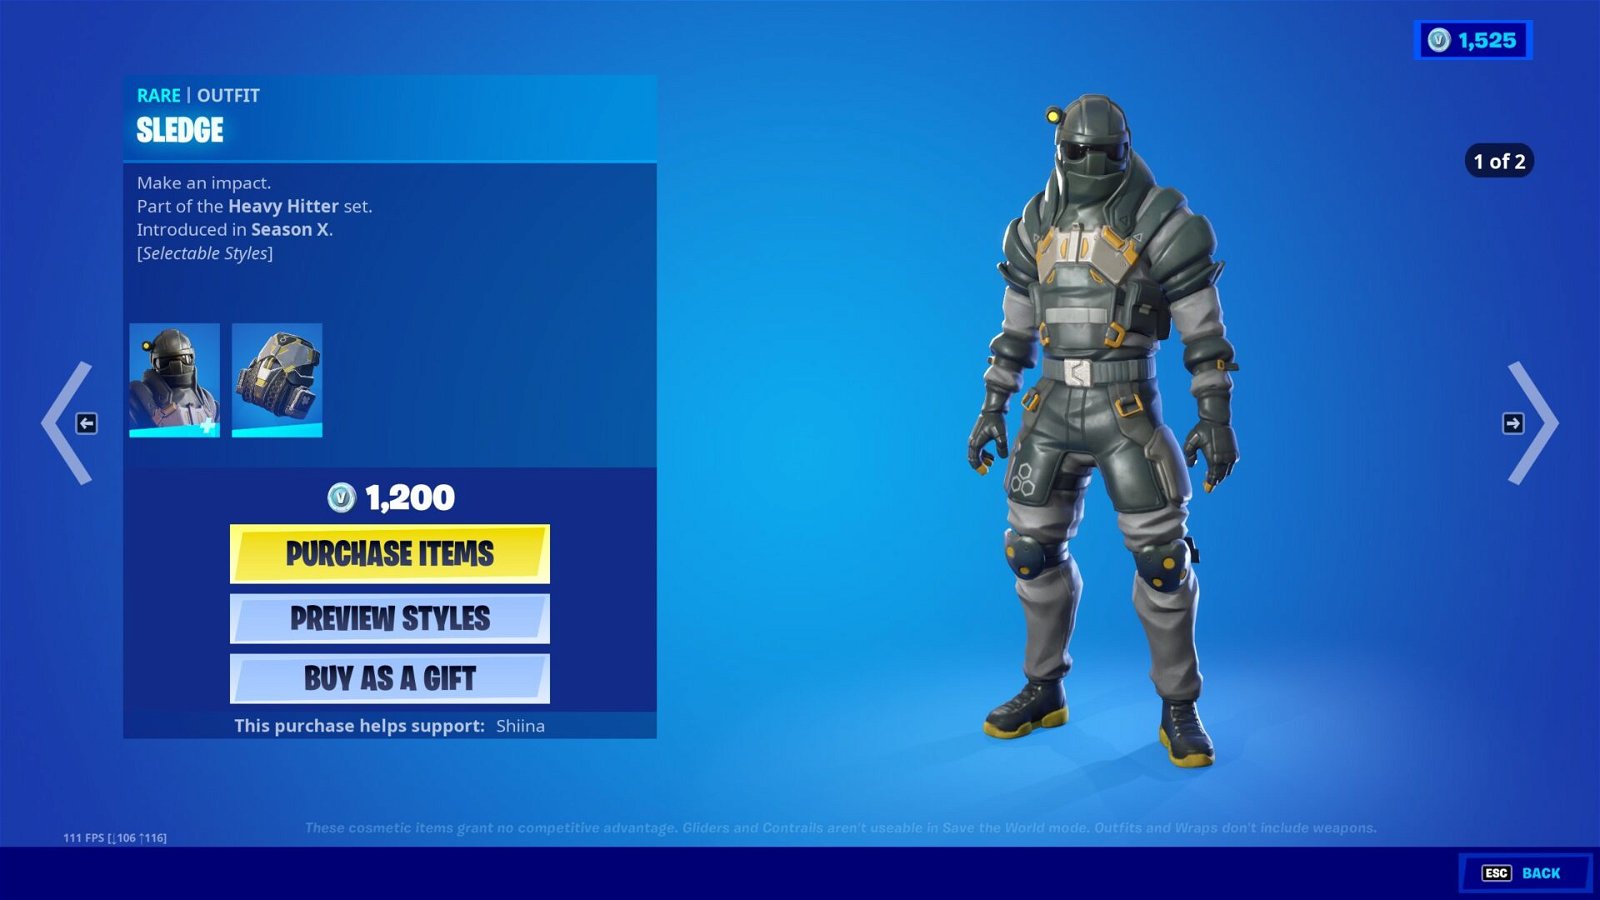 What-Are-The-Rarest-Fortnite-Skins-In-2023 2023-10-23_20-40-21_552158